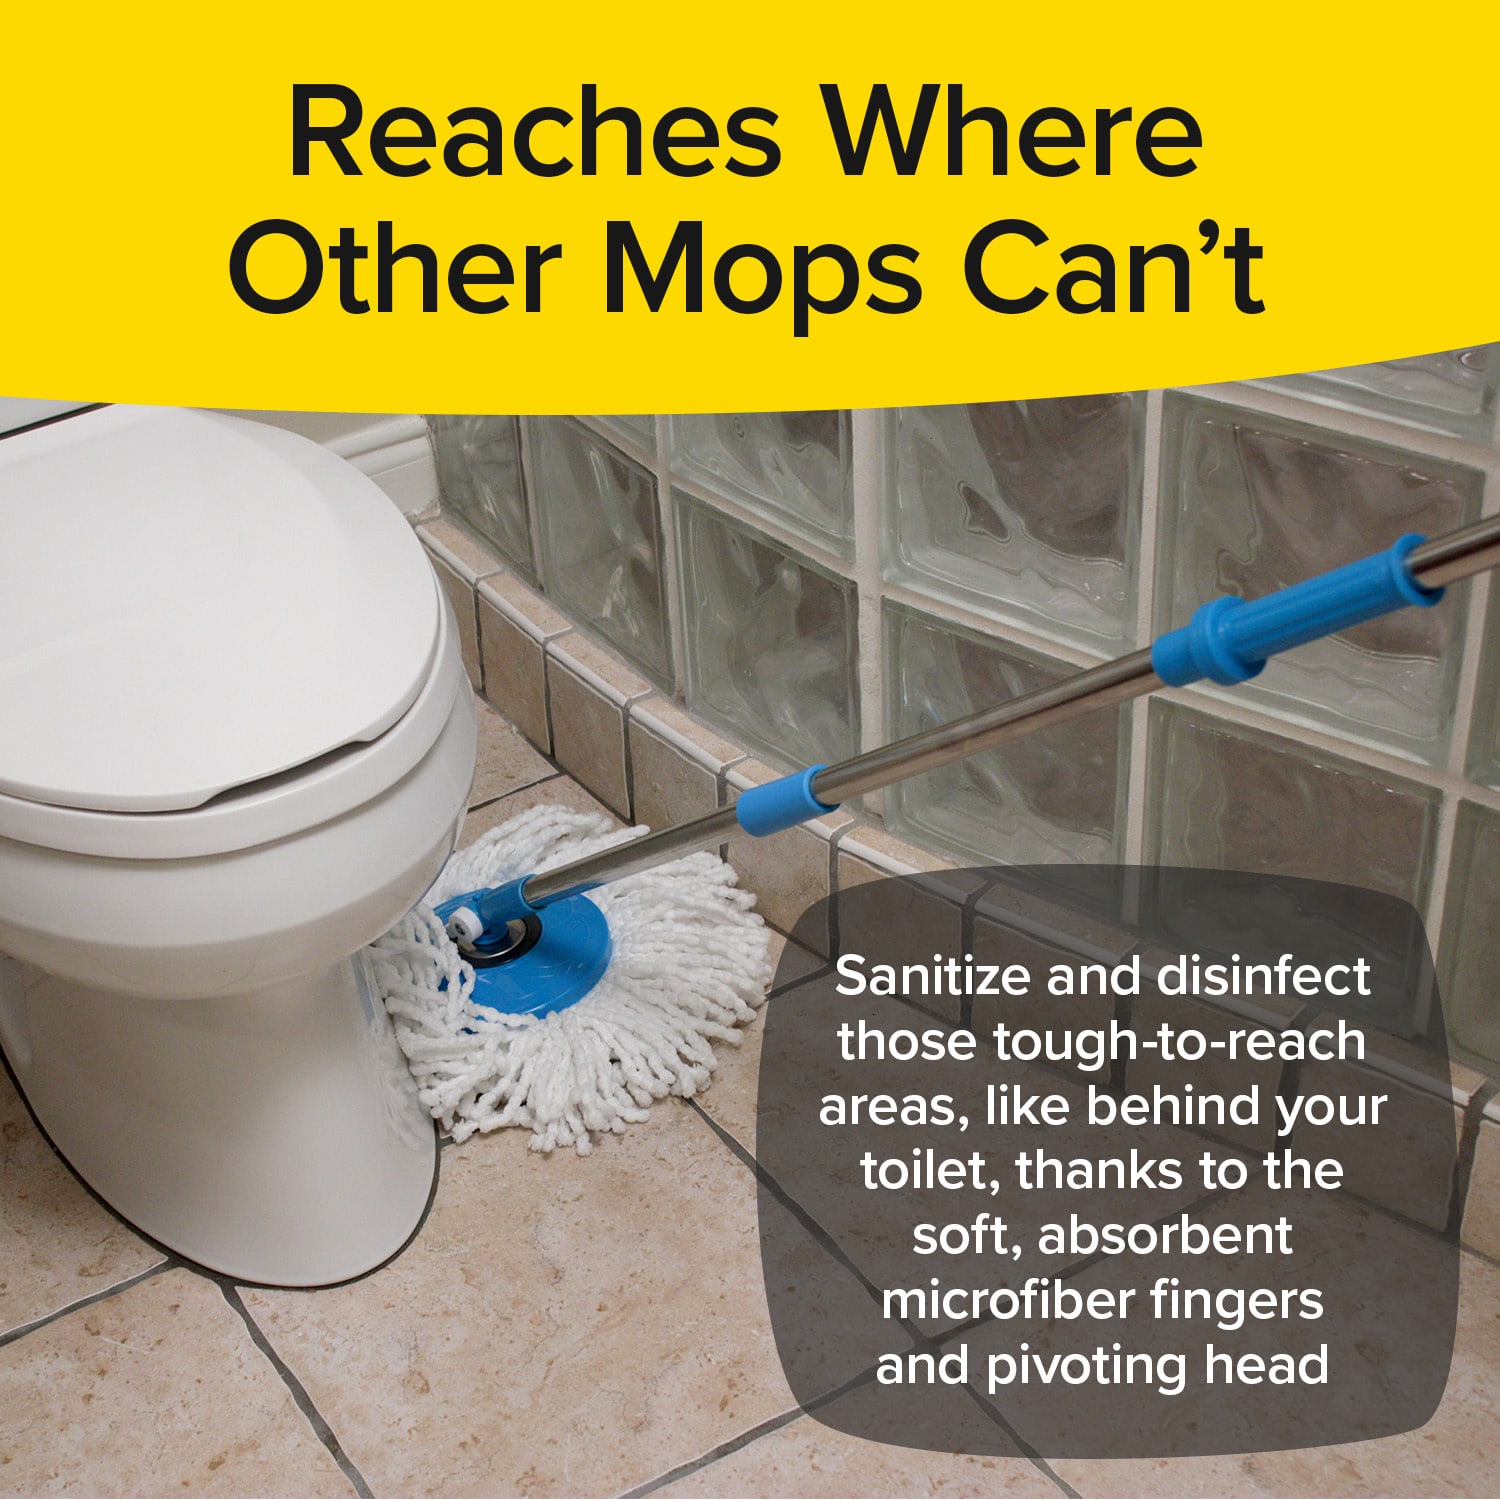 Hurricane Spin Mop As Seen On TV Mop & Bucket Cleaning System by BulbHead - image 5 of 9